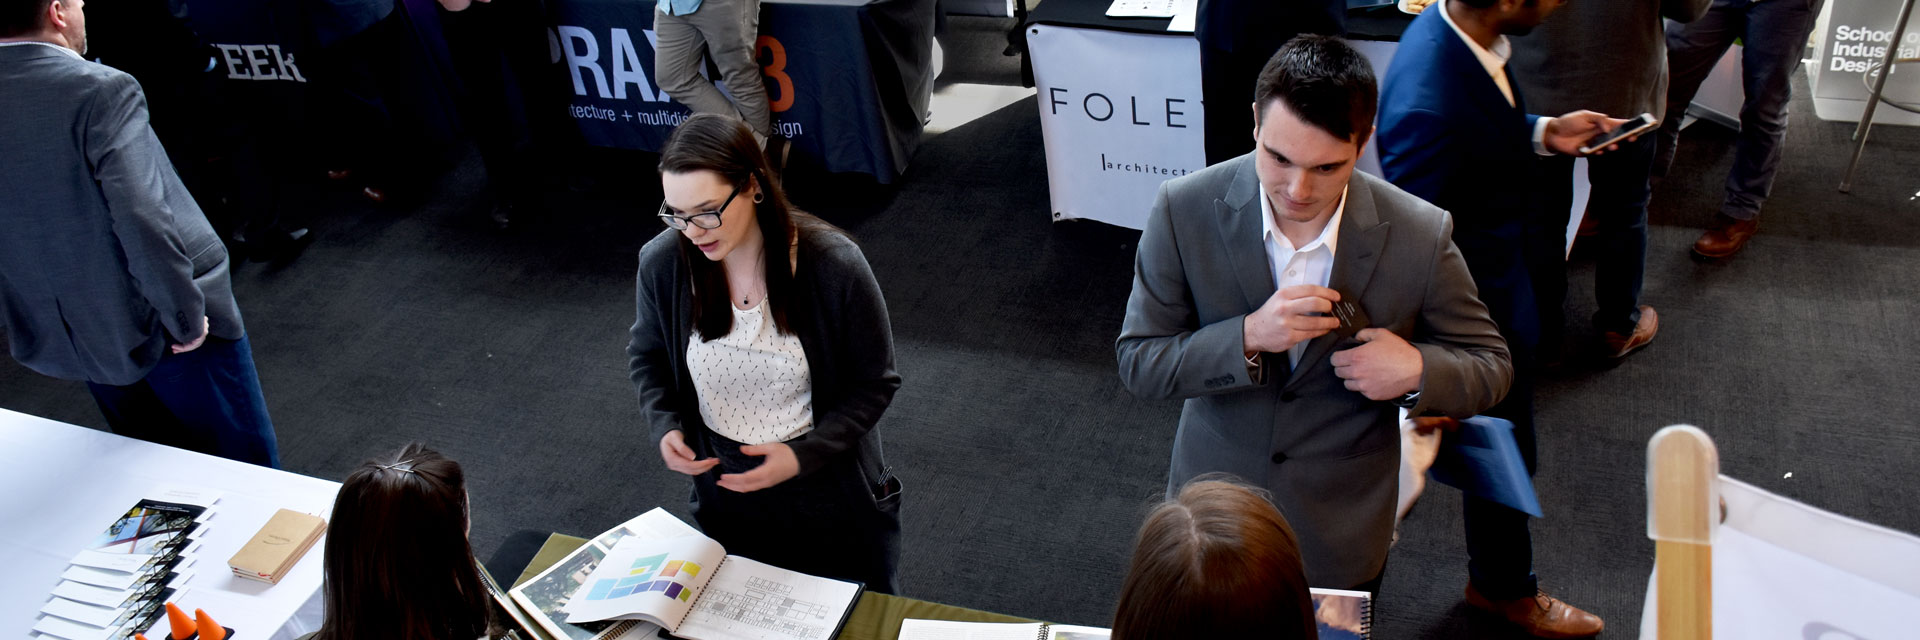 Students at Career Fair 2018 speaking to a recruiter.